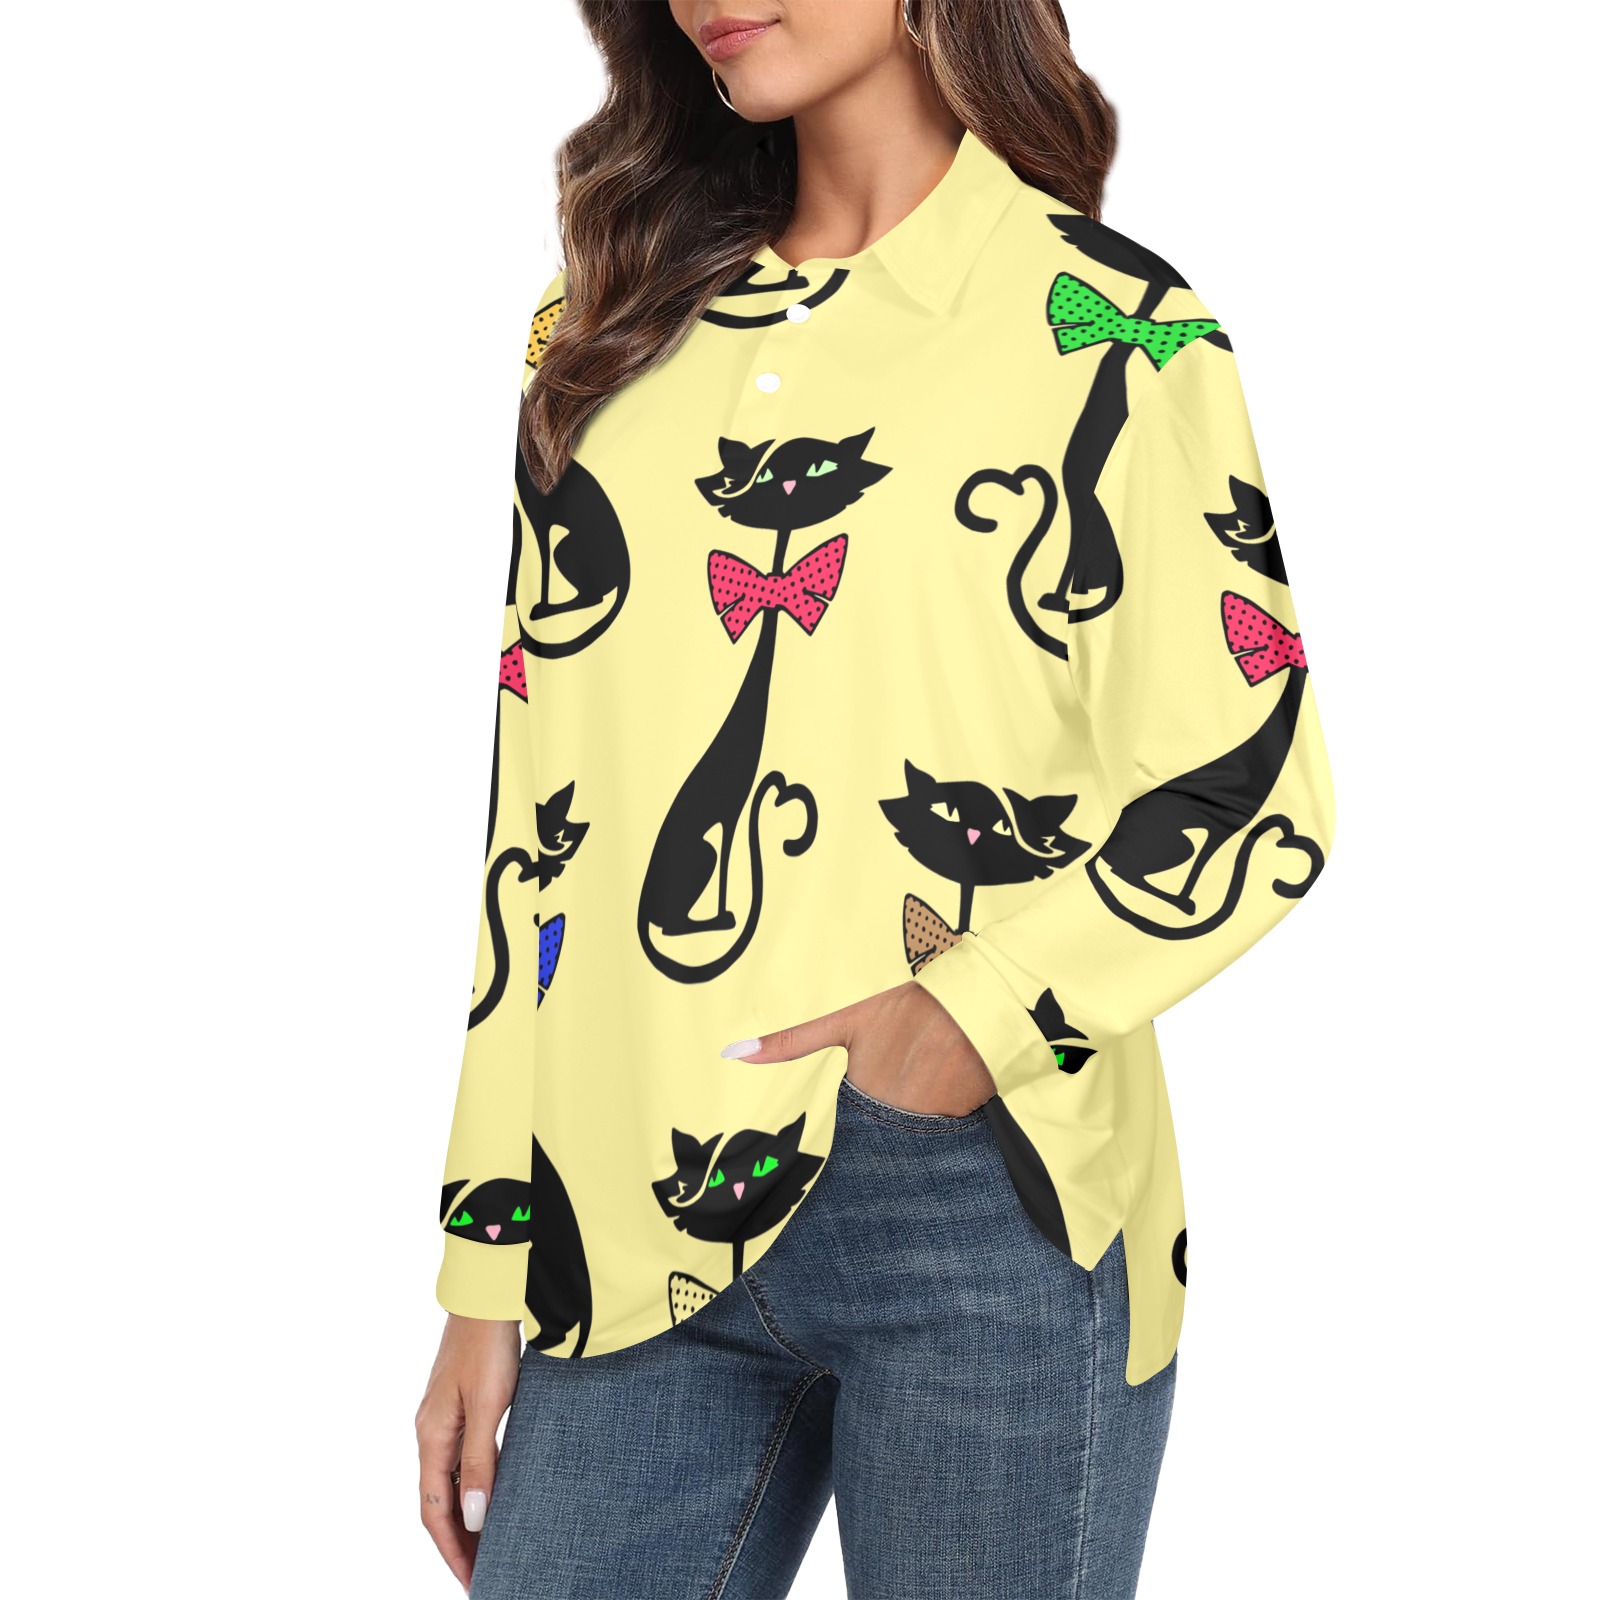 Black Cat with Bow Ties / Yellow Women's Long Sleeve Polo Shirt (Model T73)